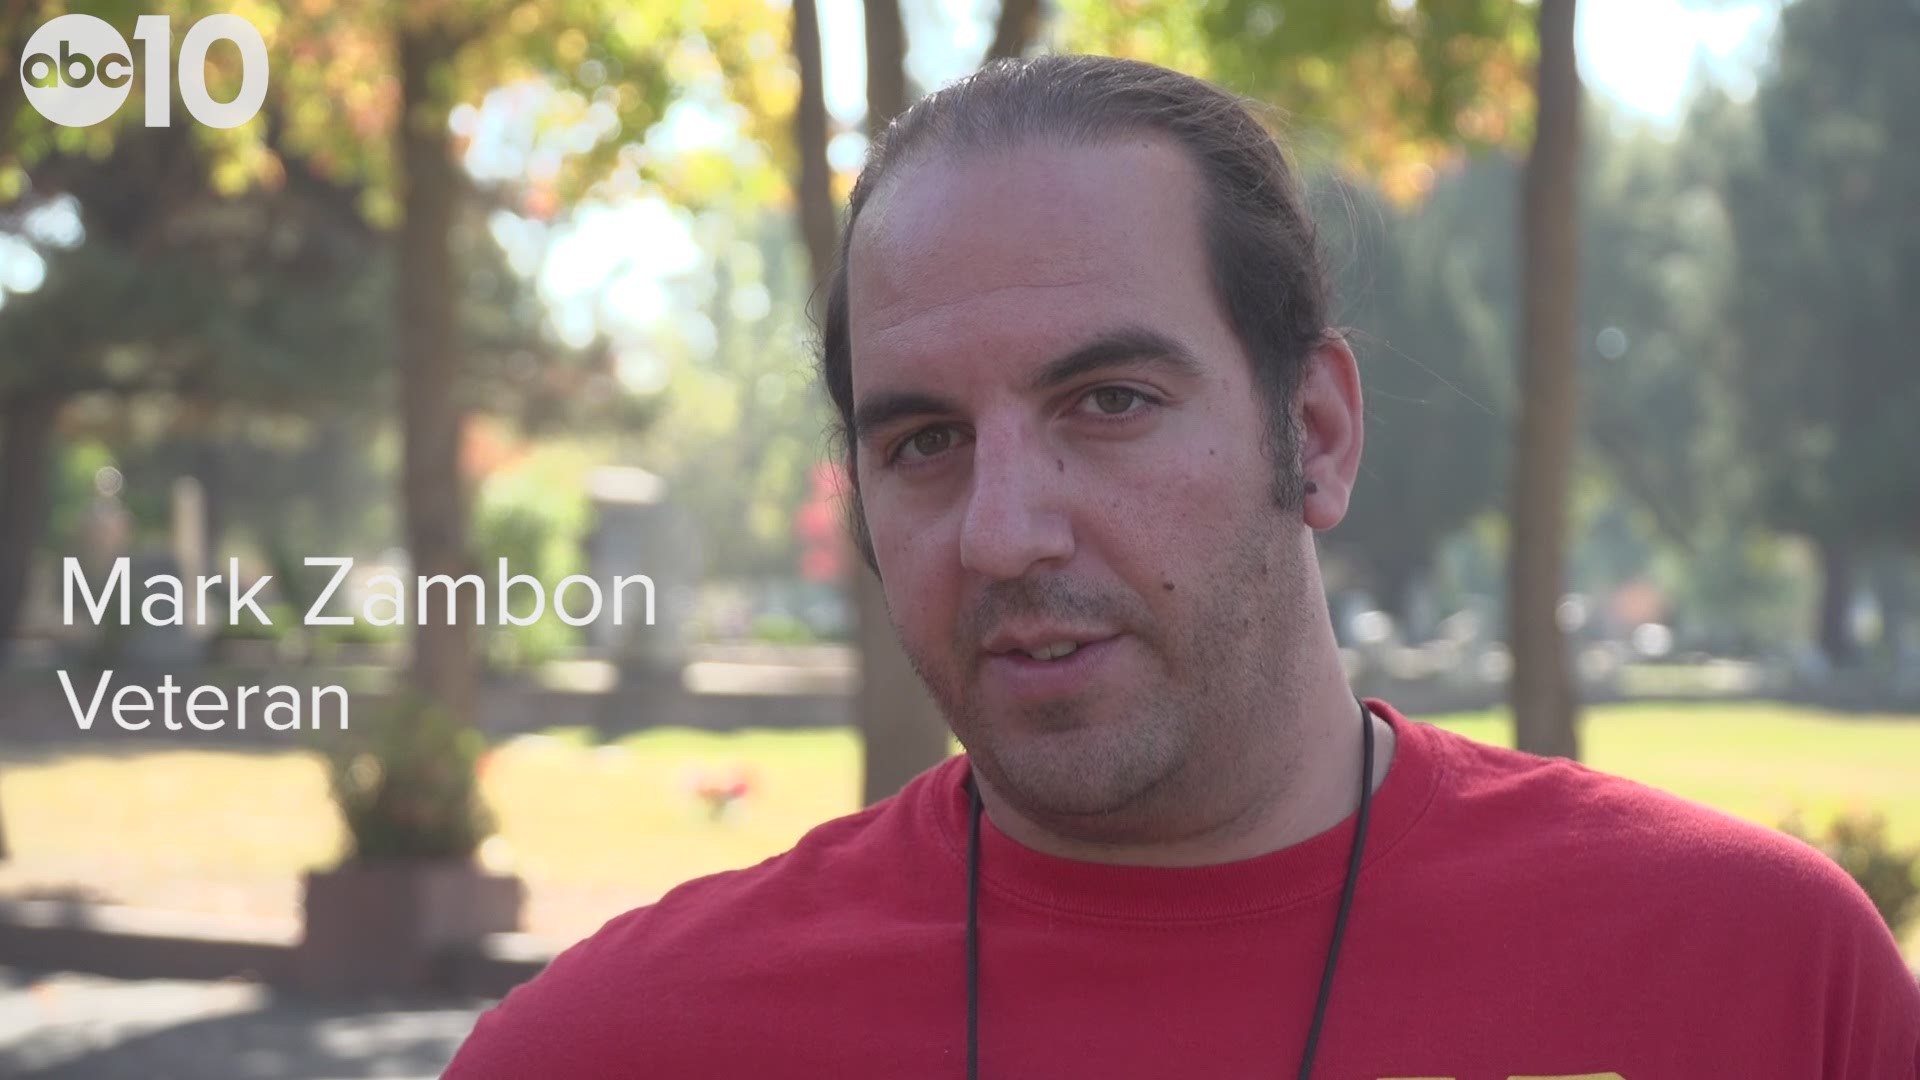 Veteran Mark Zambon talks about the tour and his time in the military.